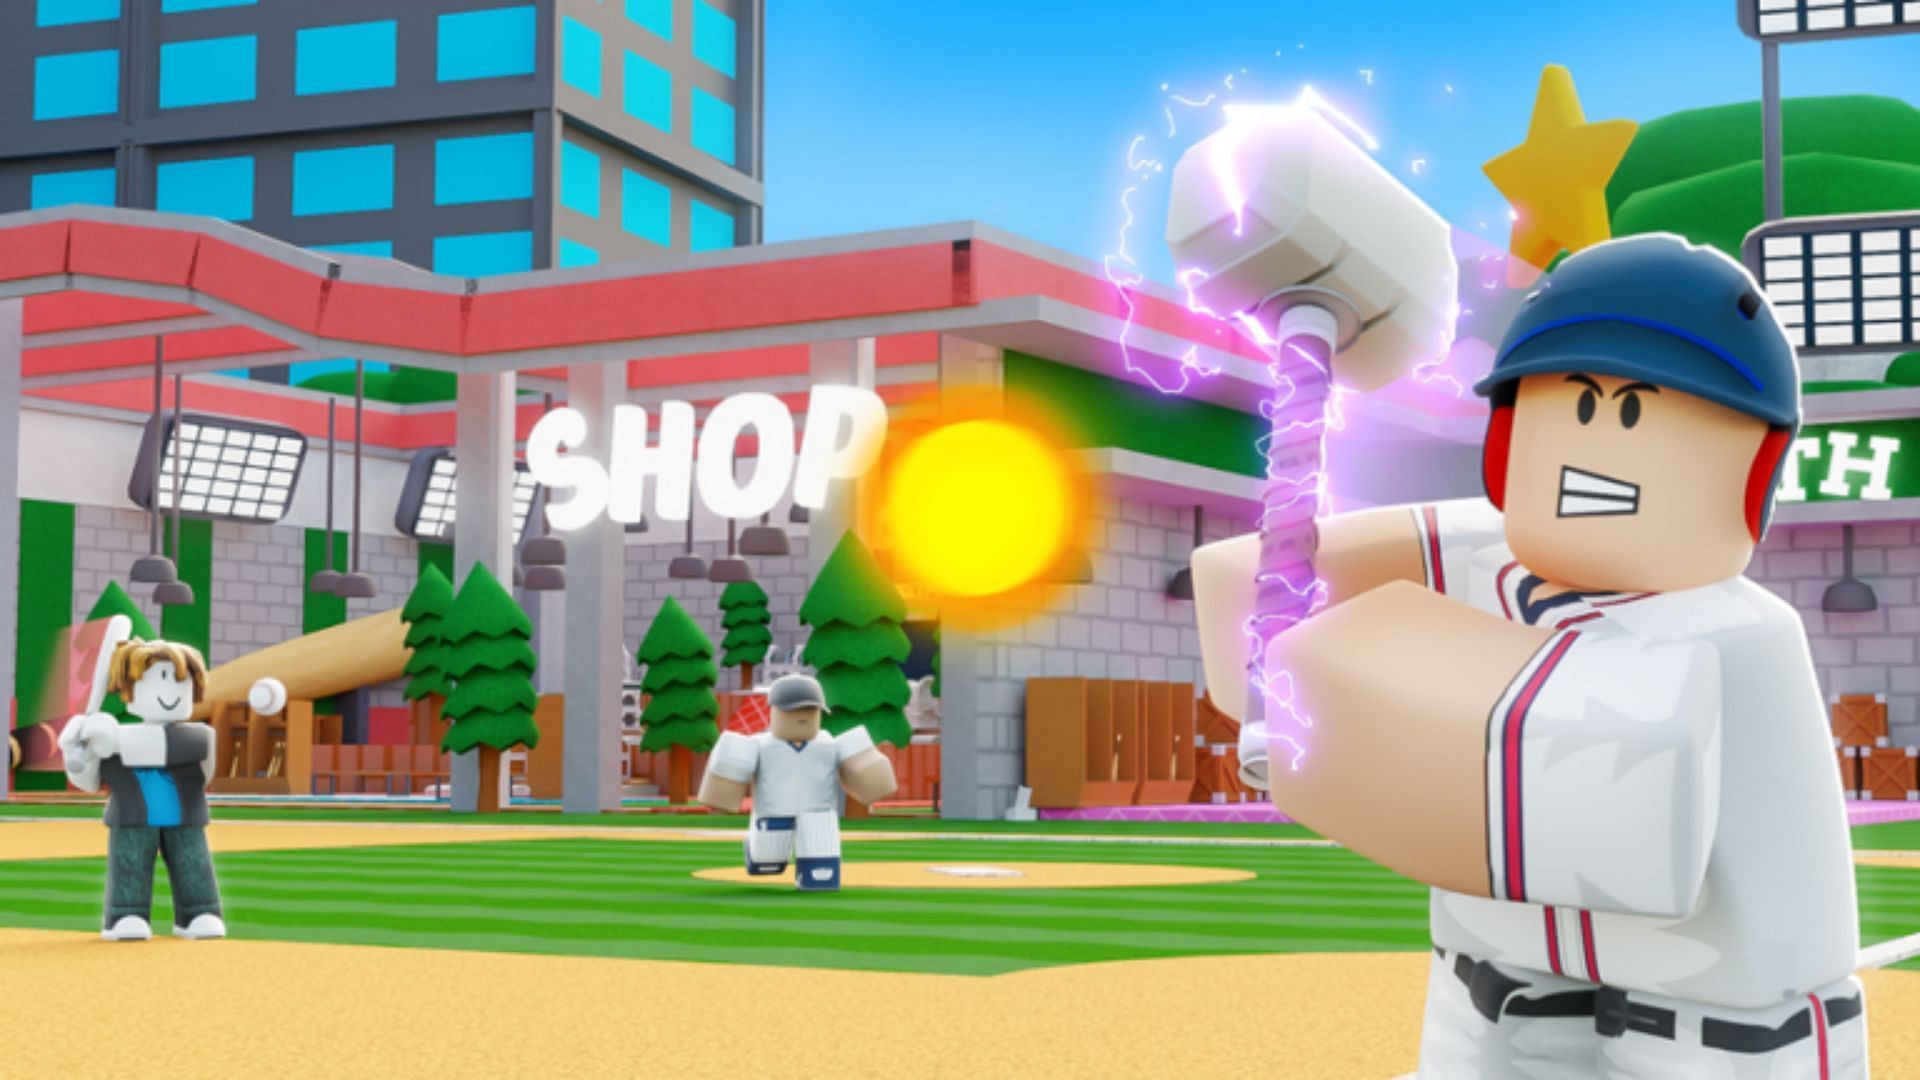 Codes for Home Run Simulator and their importance (Image via Roblox)